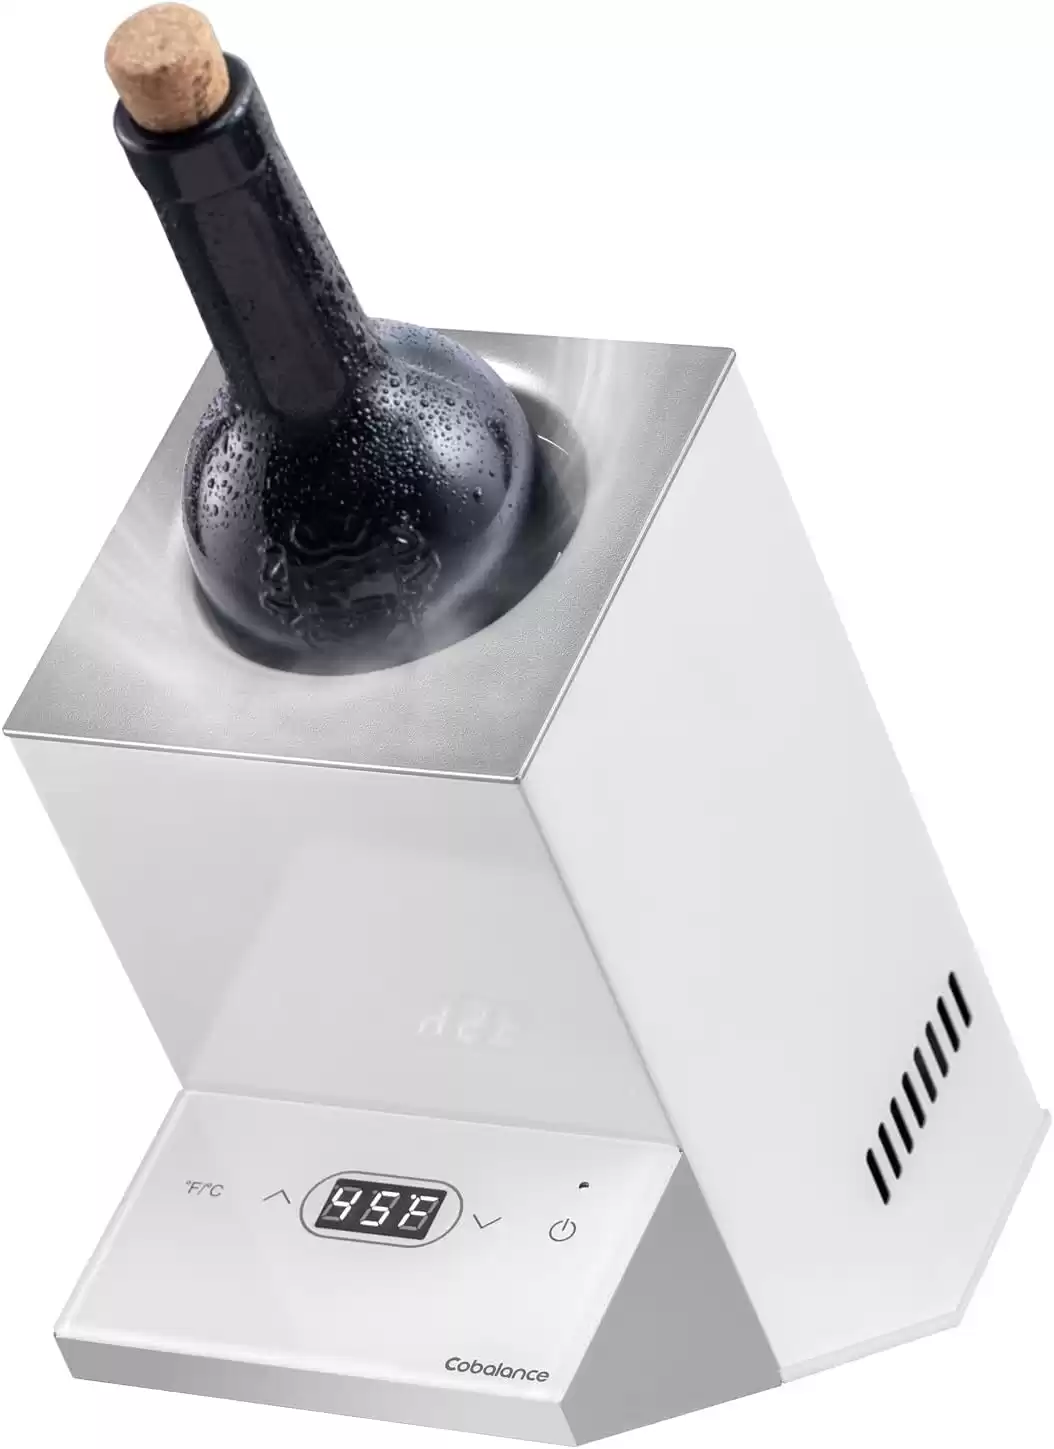 Electric Cobalance Wine Chiller, White